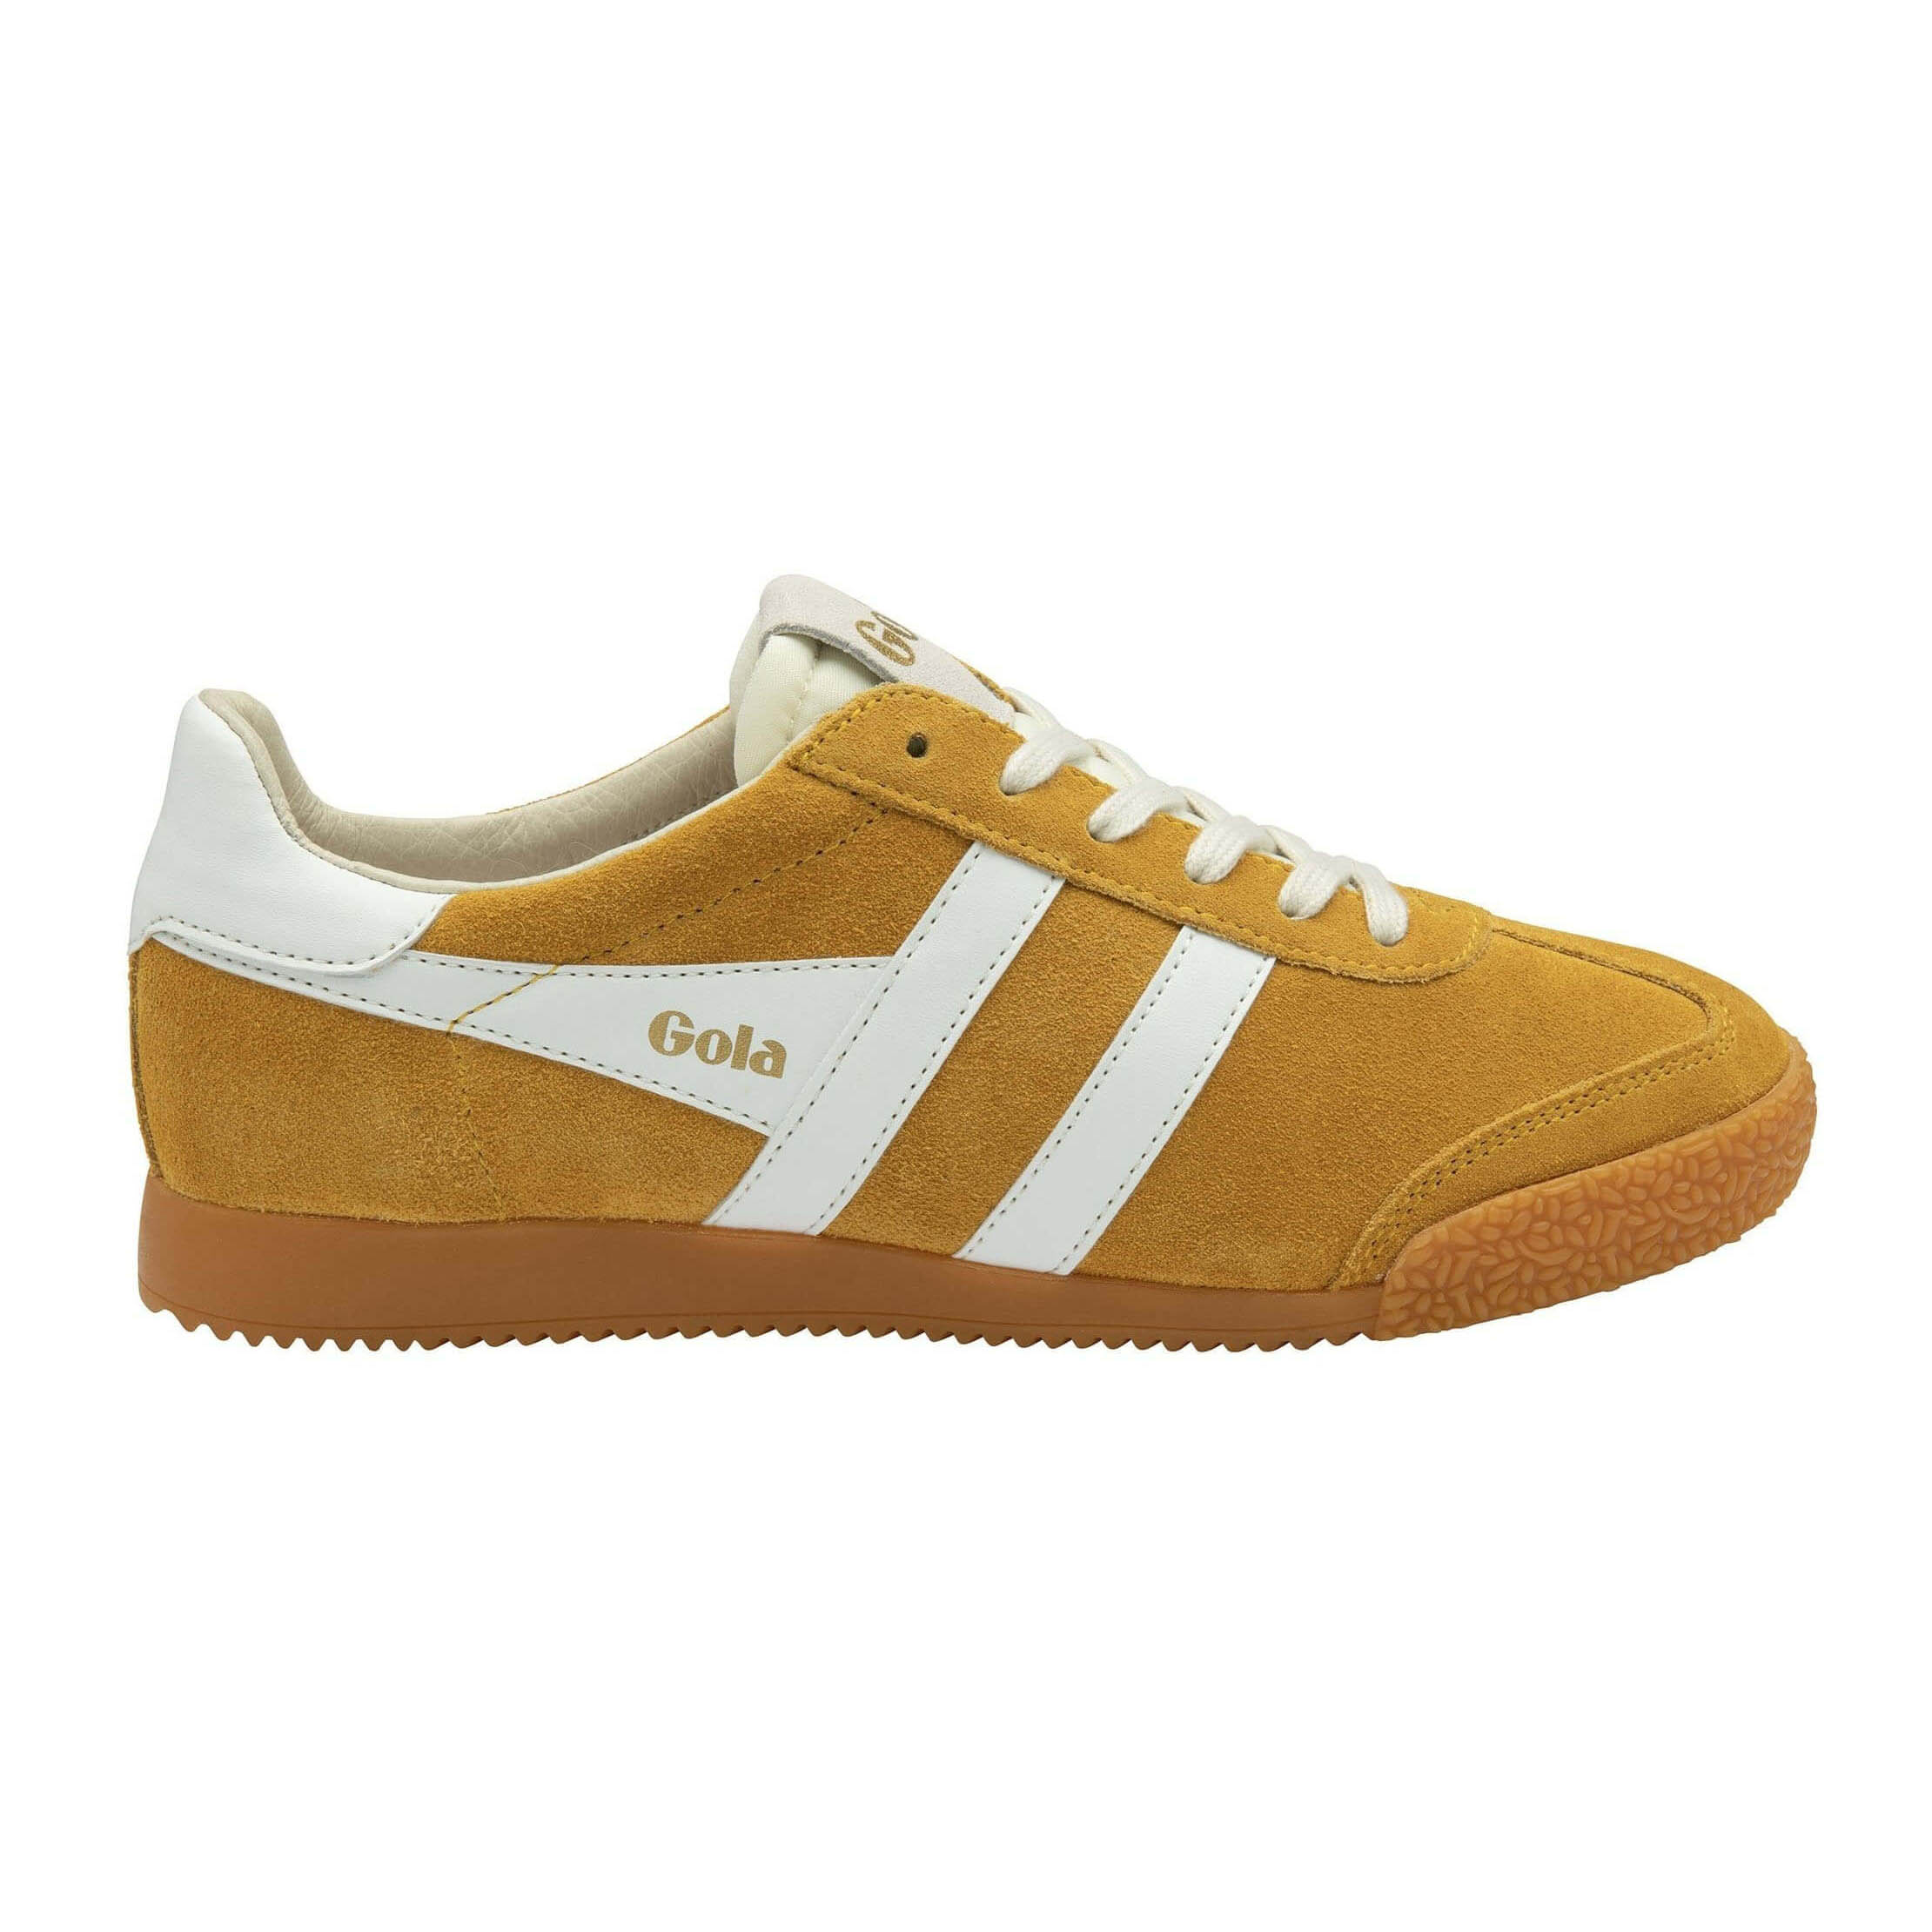 Gola sneakers for men and women.